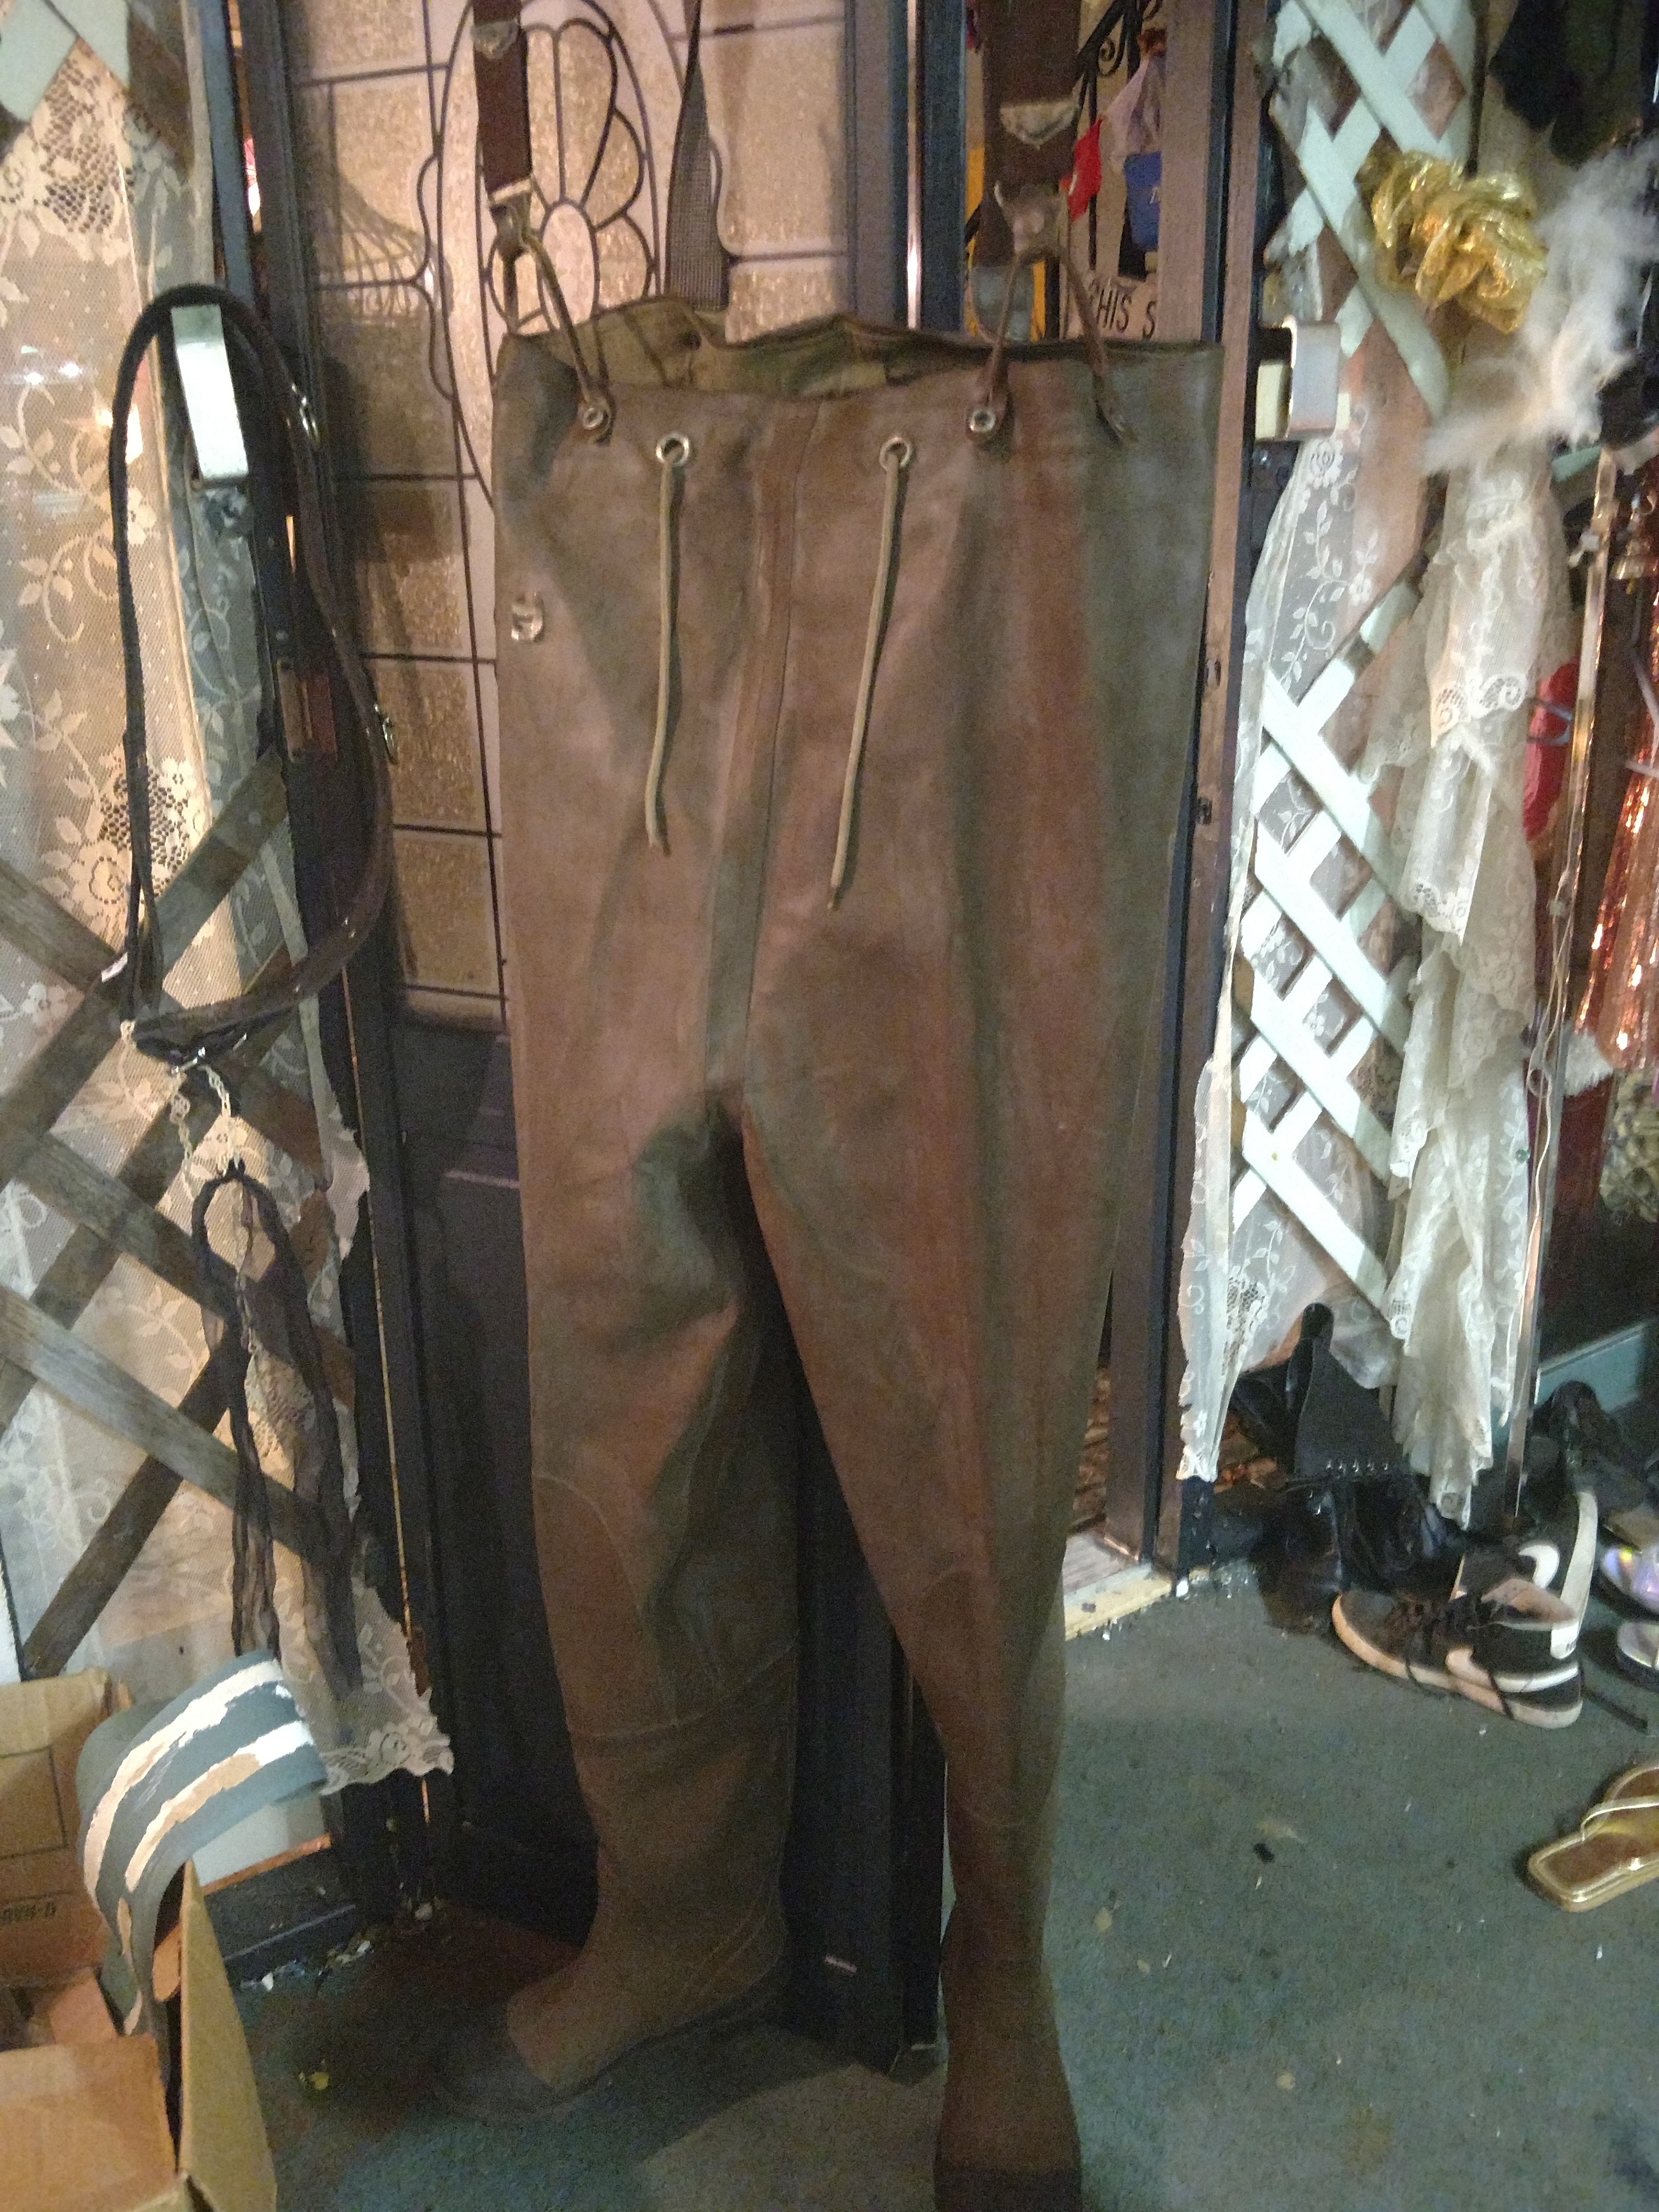 Steel shank waders awesome condition